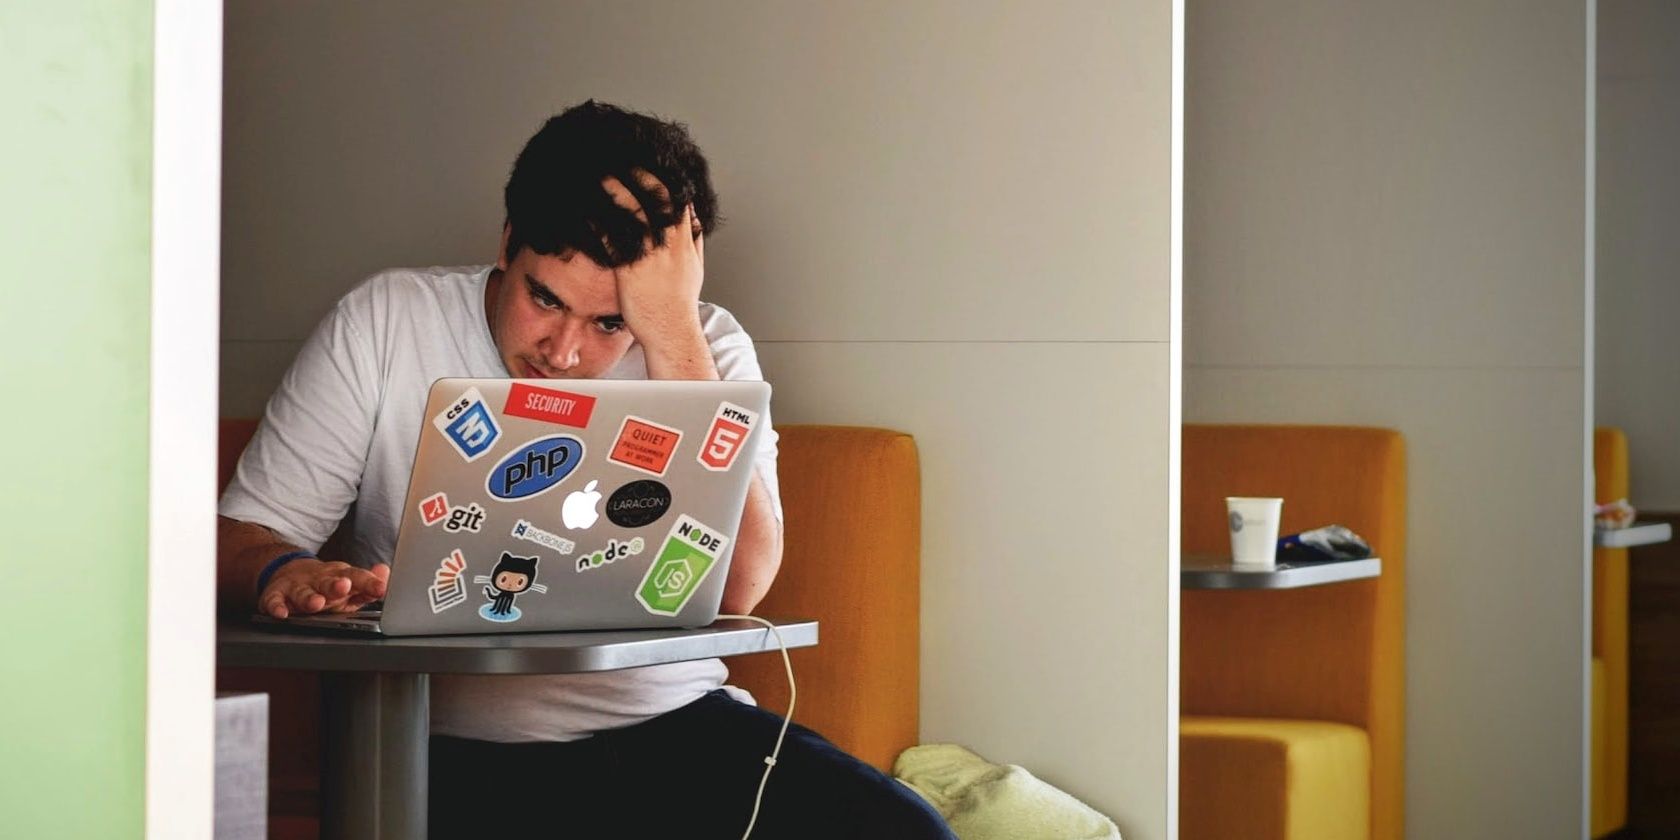 Boy looking at his laptop in frustration